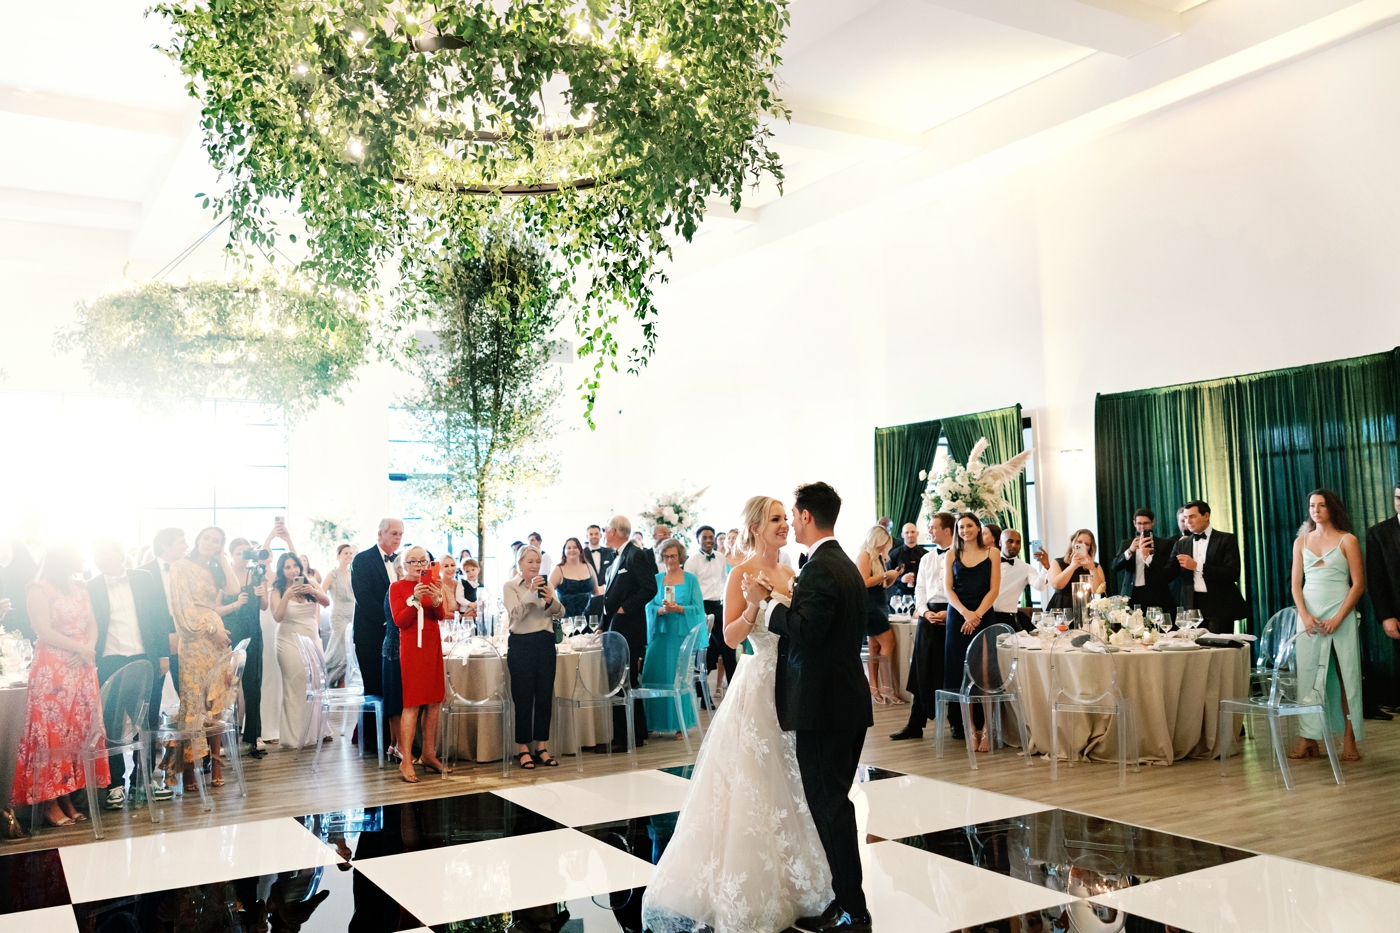 Bride and groom dancing on a checkered dance floor